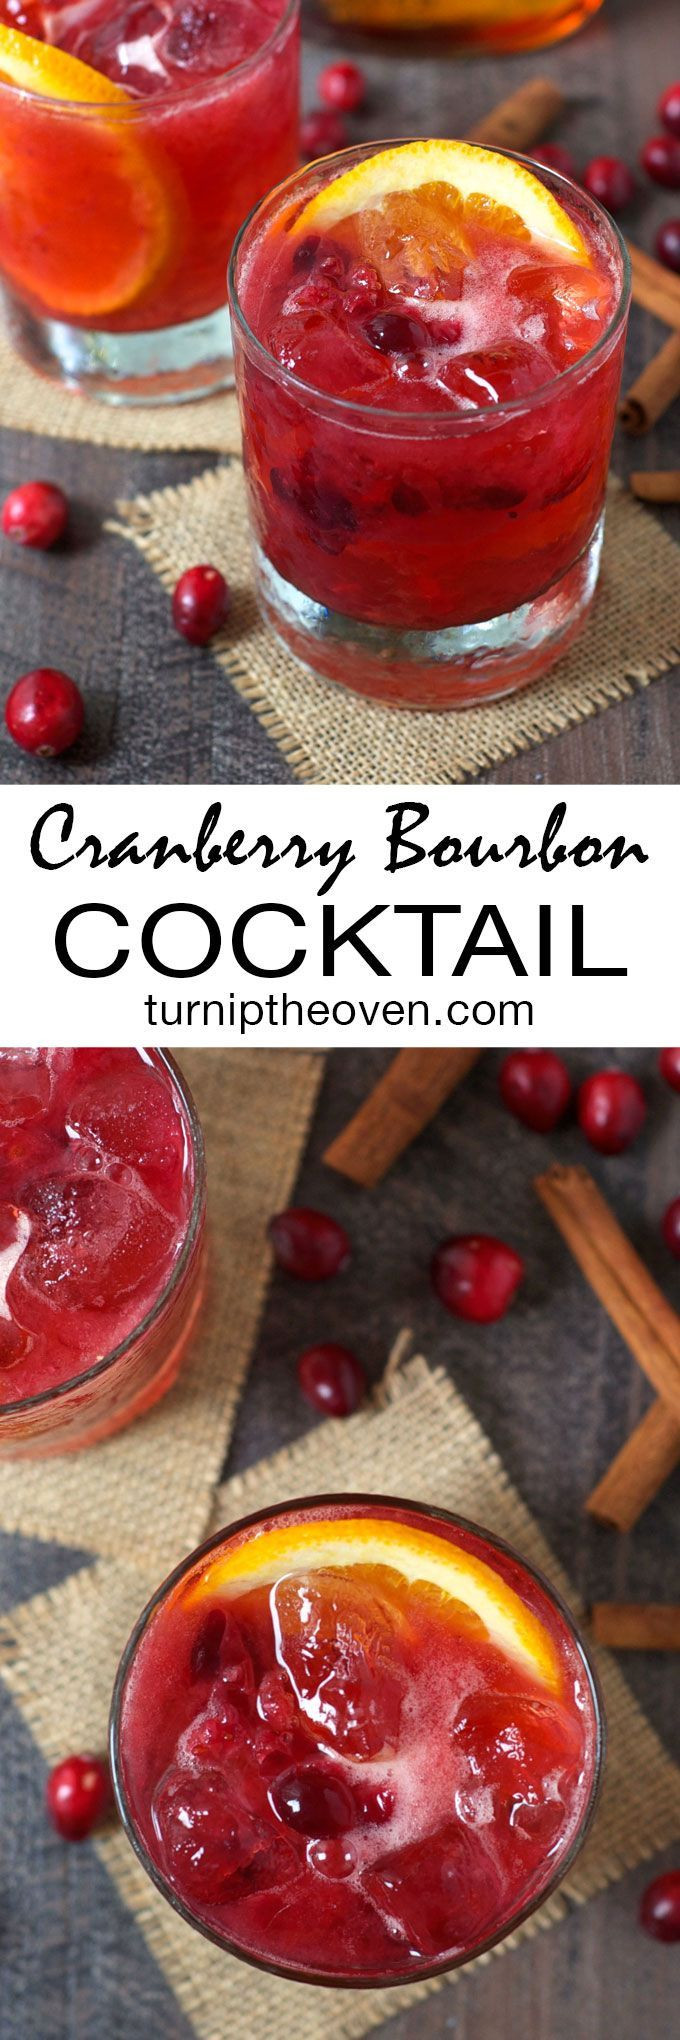 Holiday Drinks With Bourbon
 Three Ingre nt Cranberry Bourbon Cocktail